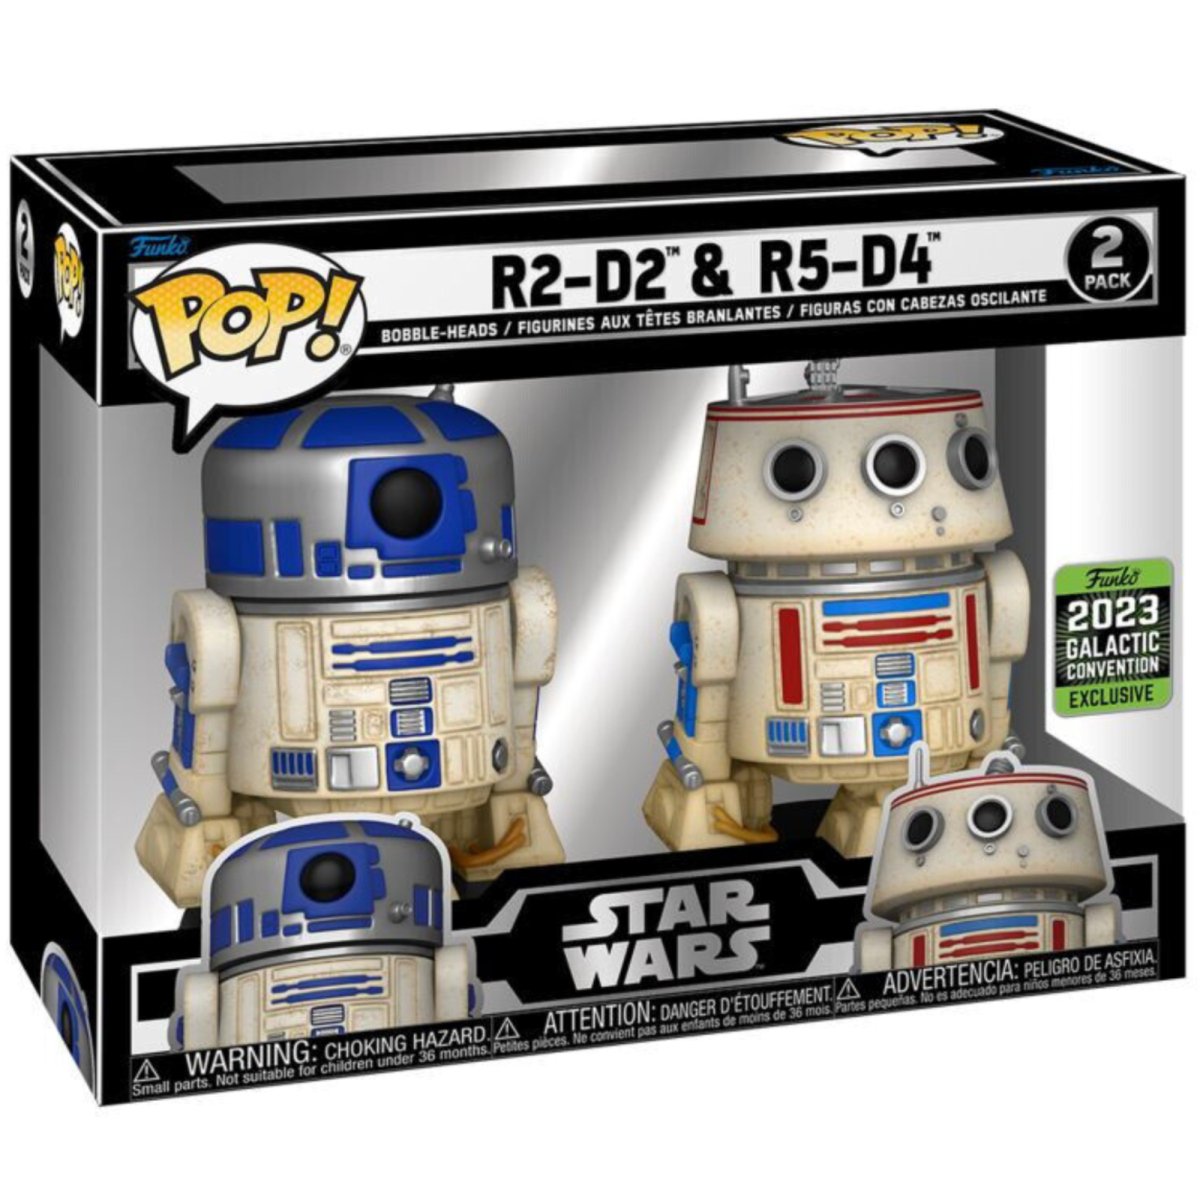 Star Wars - R2-D2 vs. R5-D4 (2023 Galactic Convention Exclusive) 2 Pack - Funko Pop! Vinyl Star Wars - Persona Toys